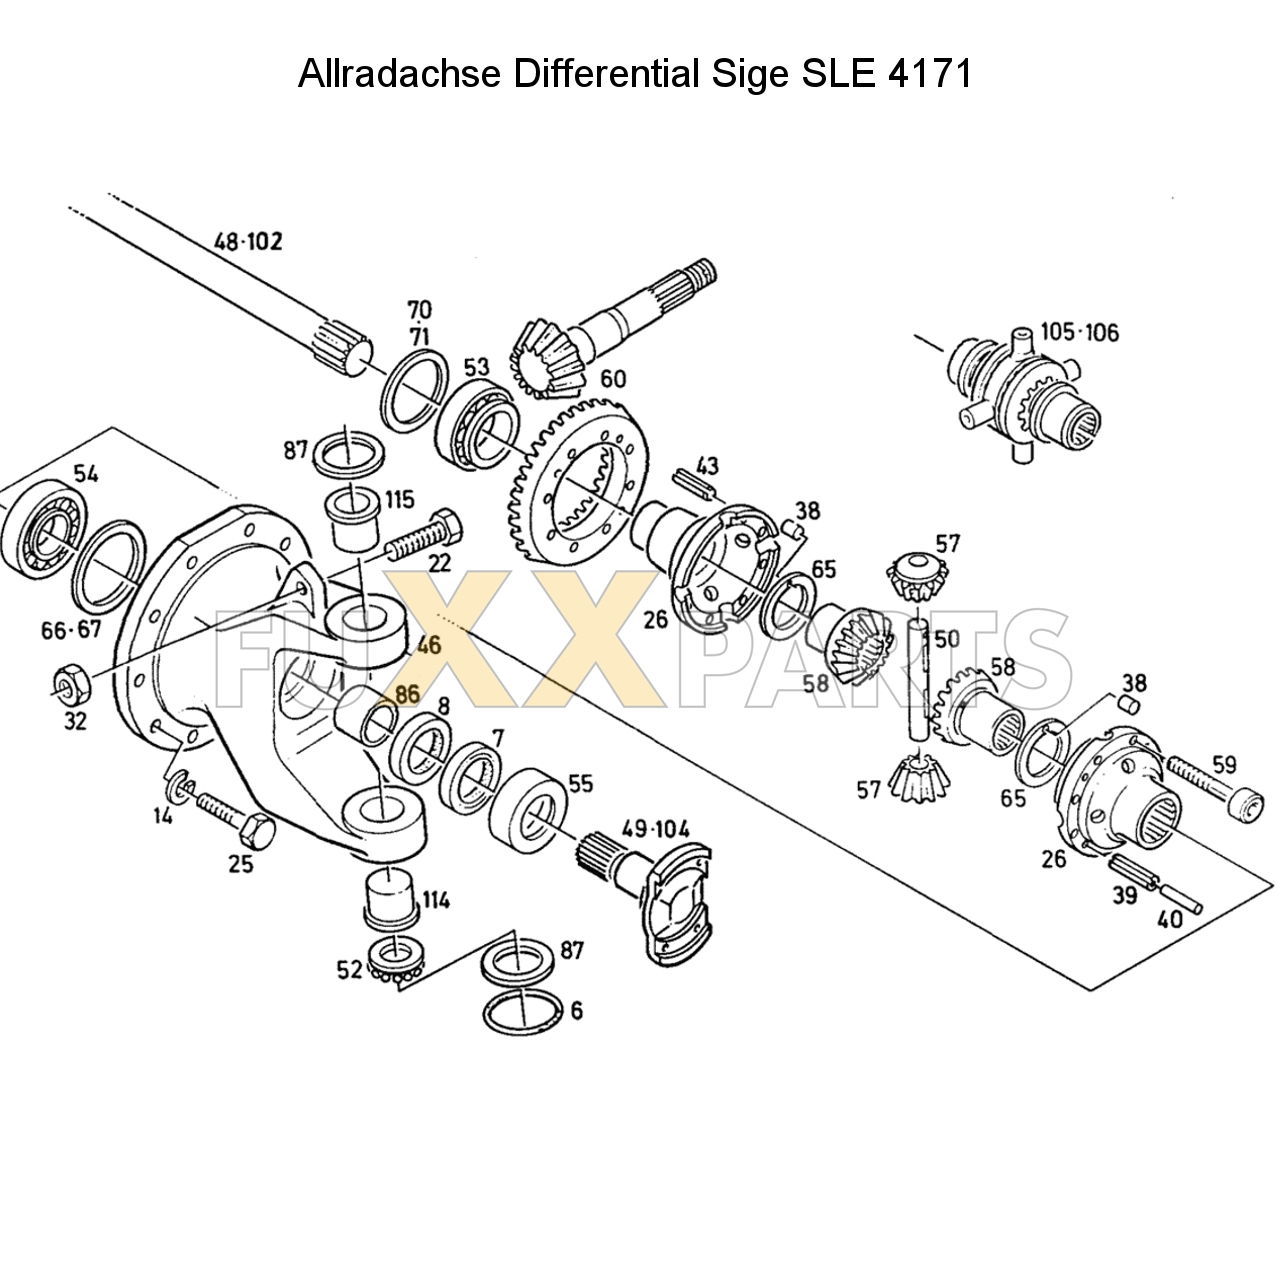 D 7807 Allradachse Differential